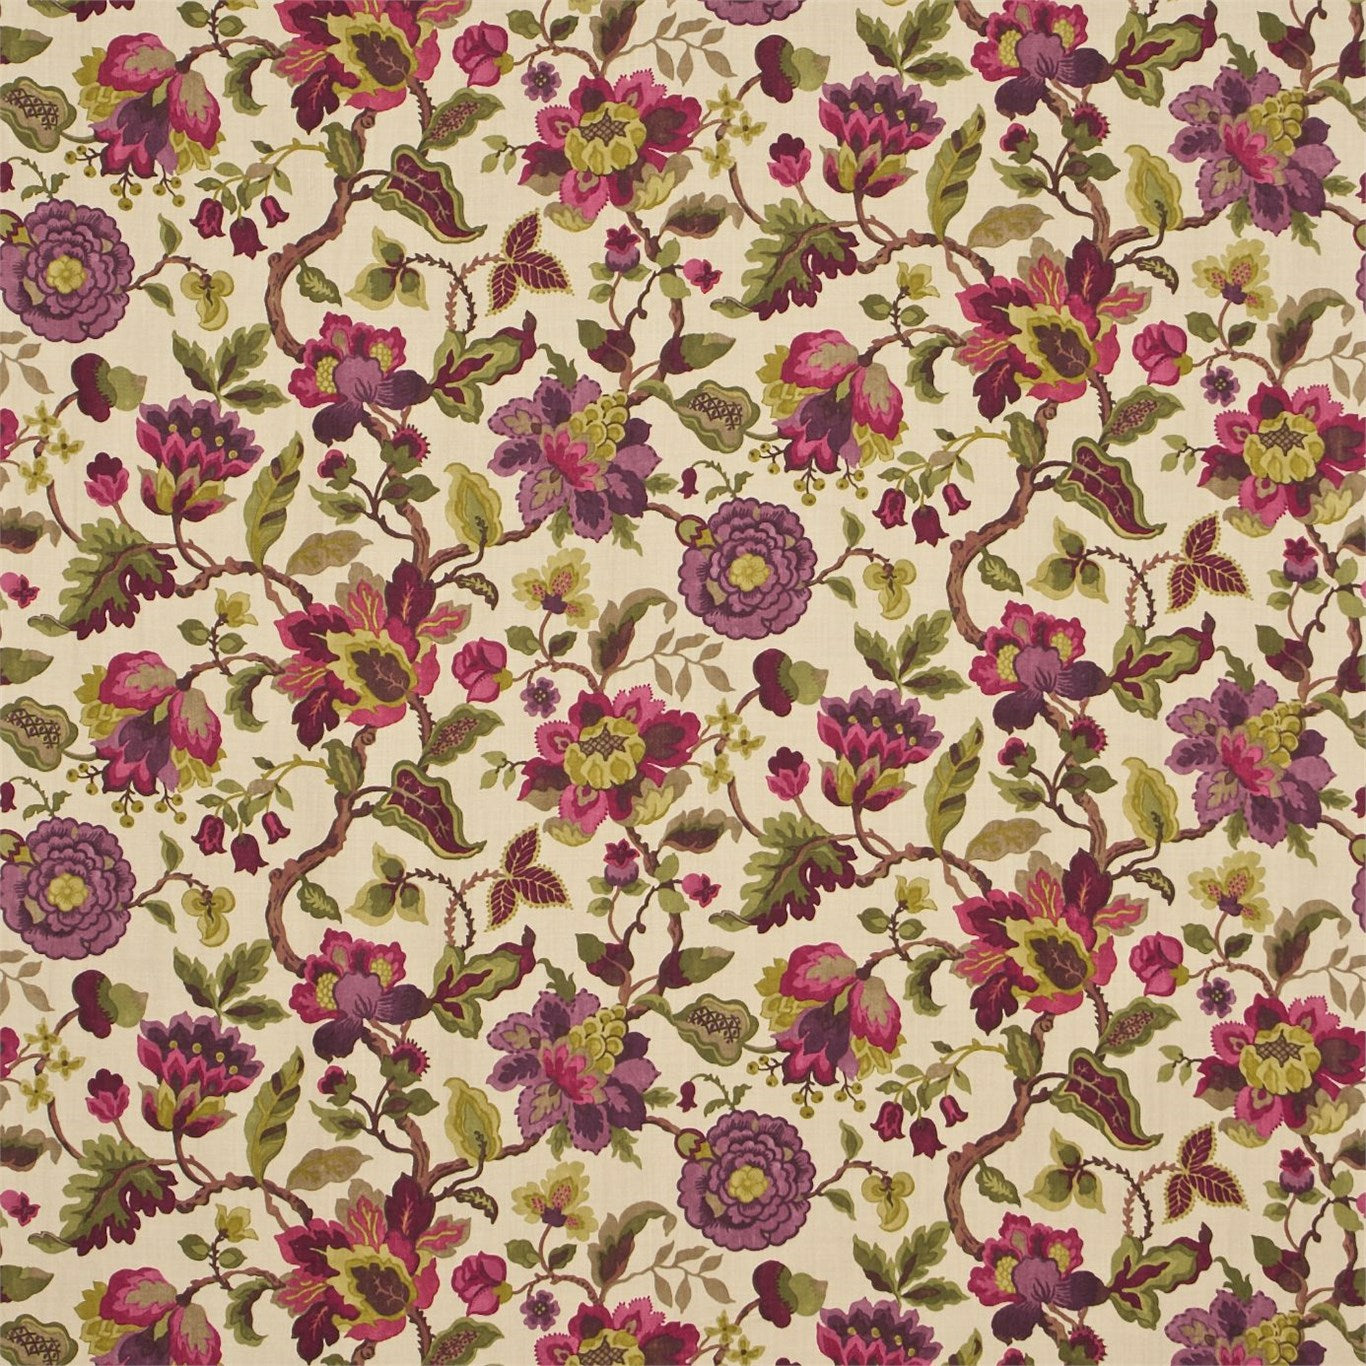 Amanpuri Fabric by Sanderson - DAUP224432 - Mulberry/Olive